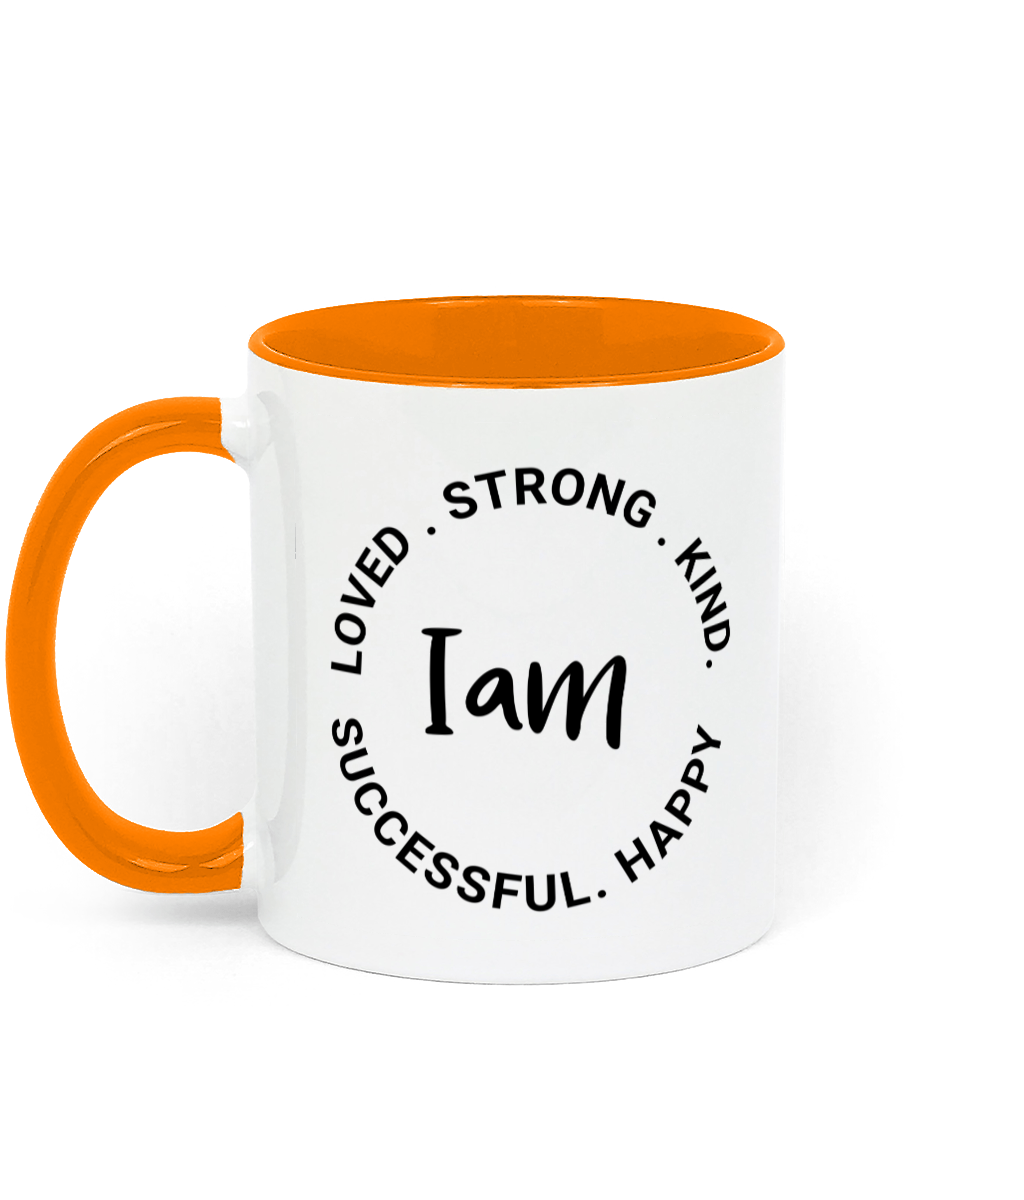 I Am Loved. Strong. Kind. Successful. Happy.11 oz two-toned mug. Daily Affirmations, Motivation, Inspiration. Perfect Gift.